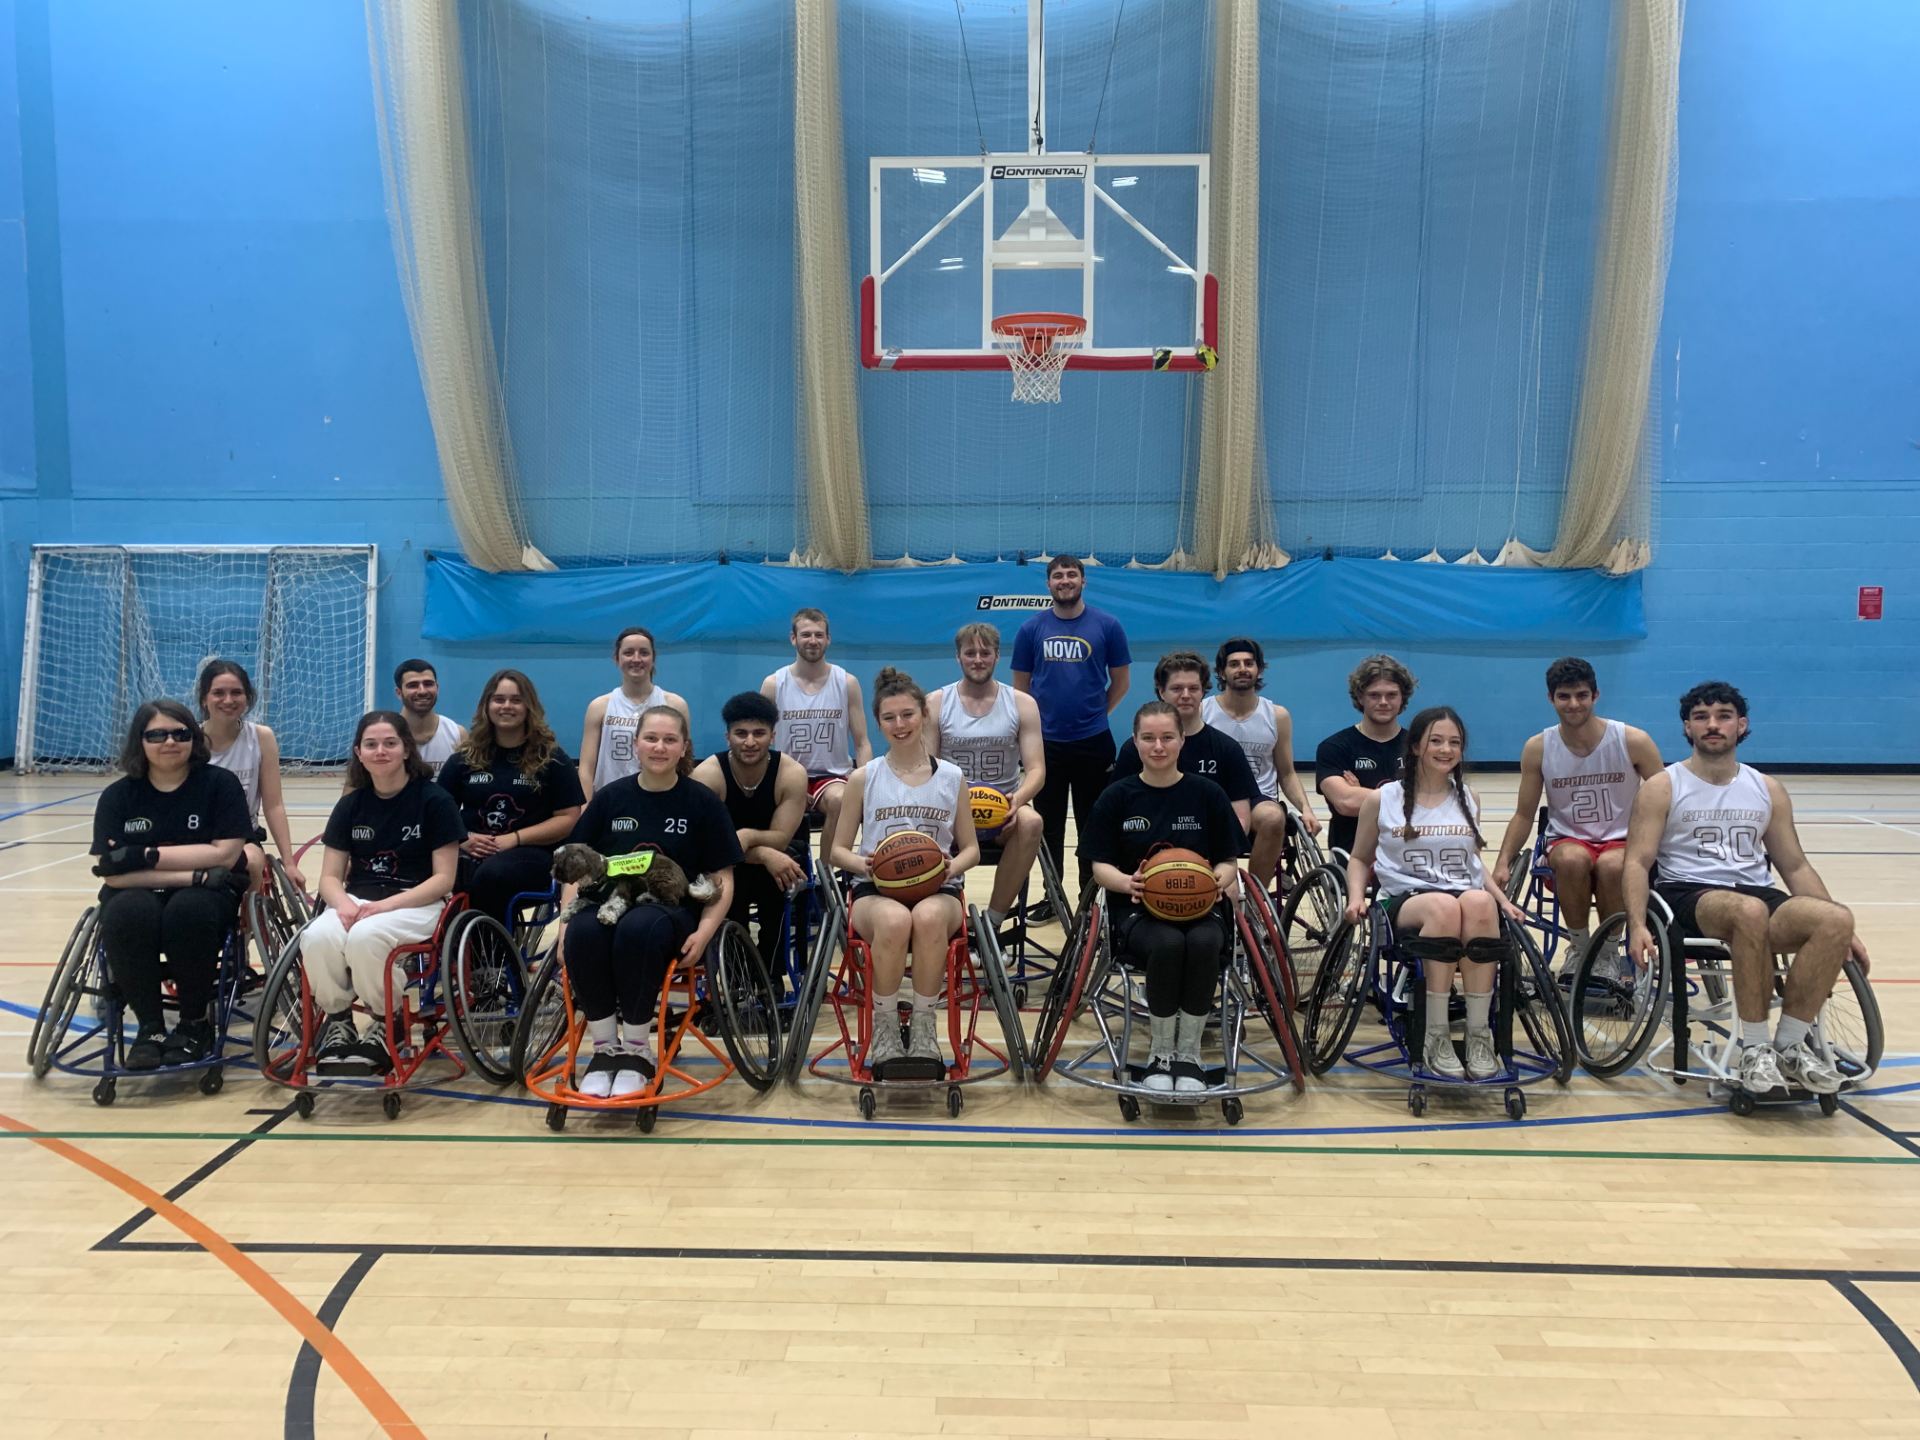 The wheelchair basketball team posed for a photo